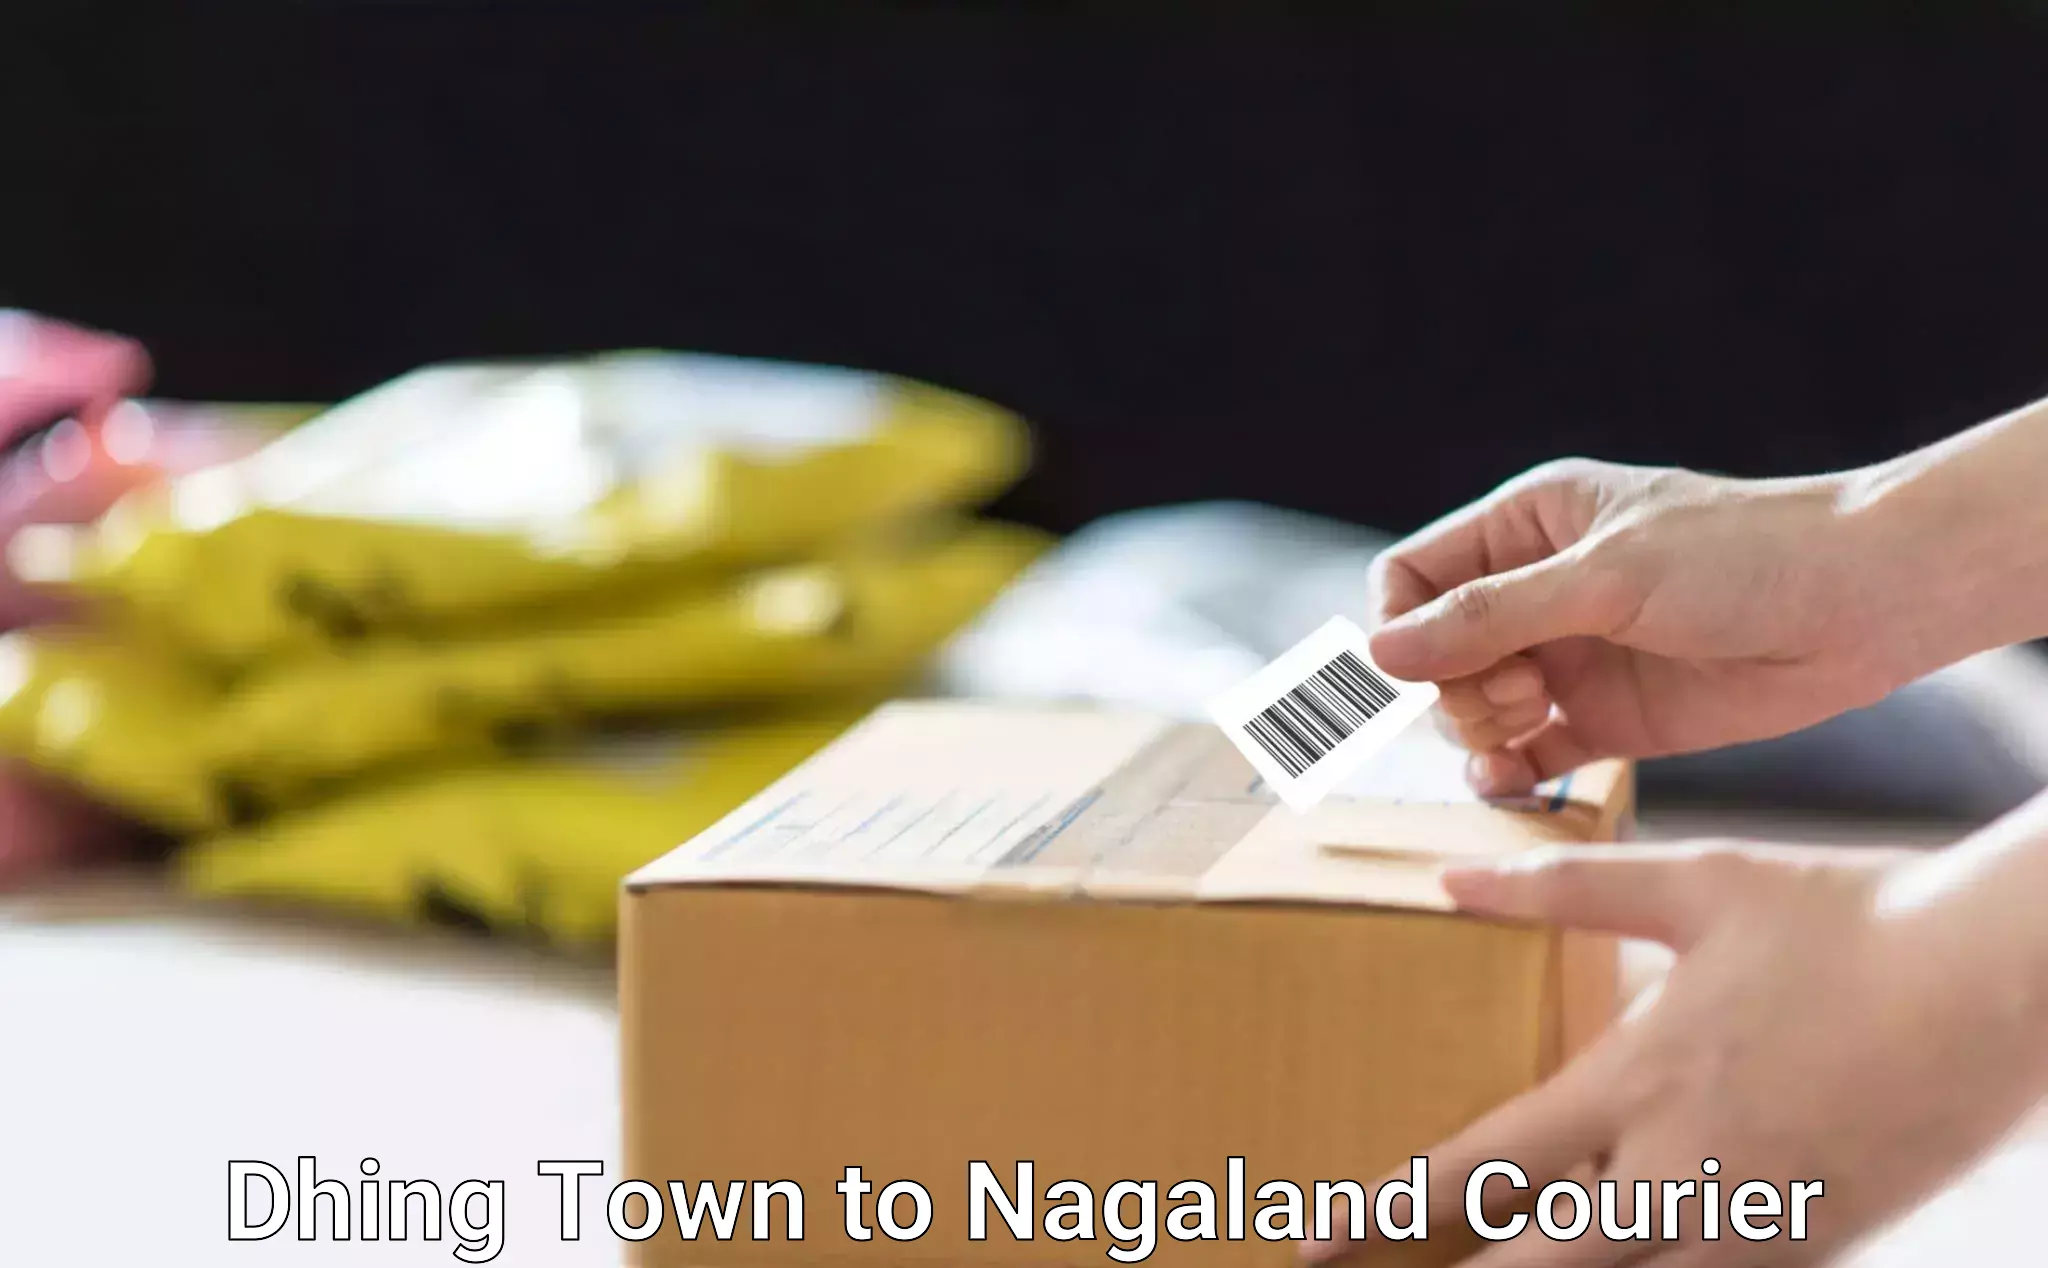 Courier app Dhing Town to Nagaland